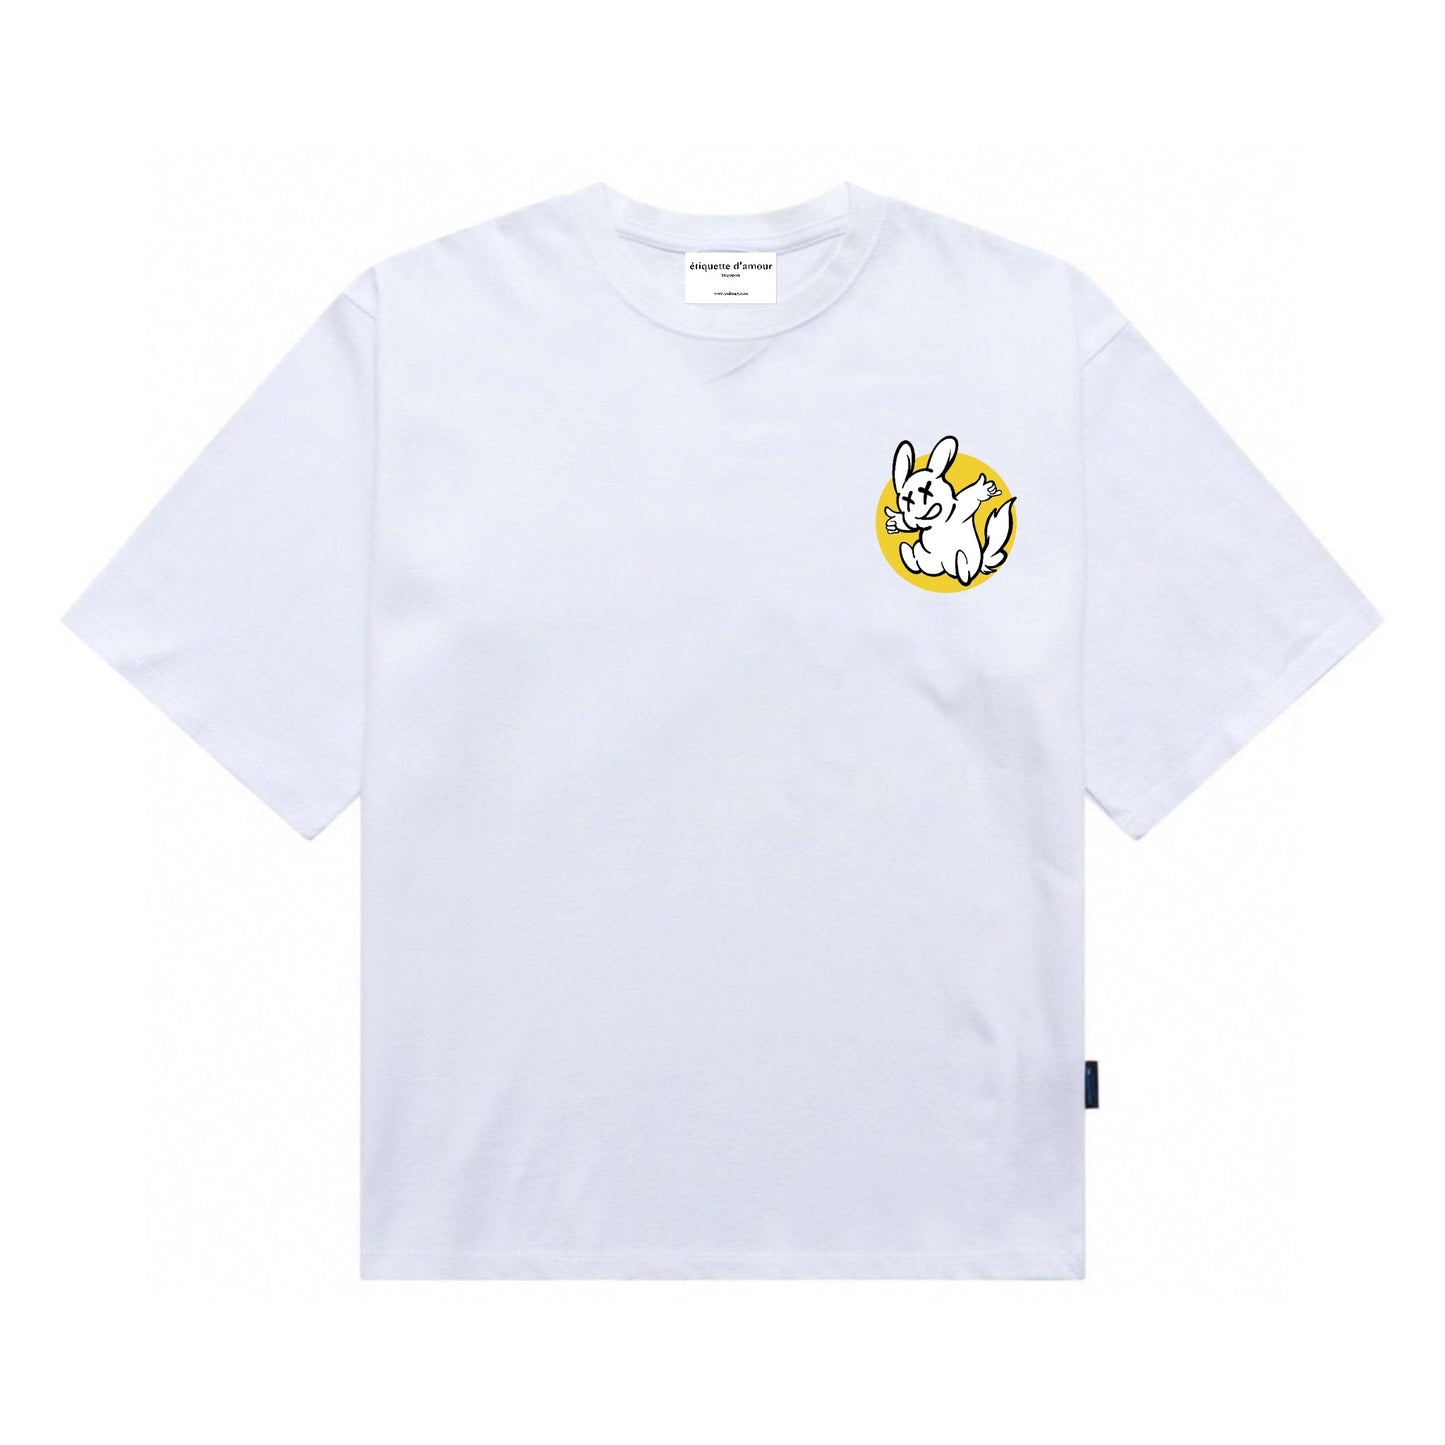 Etiquette Oversized T-Shirt - [0063] Fxxking Rabbit Chill Out